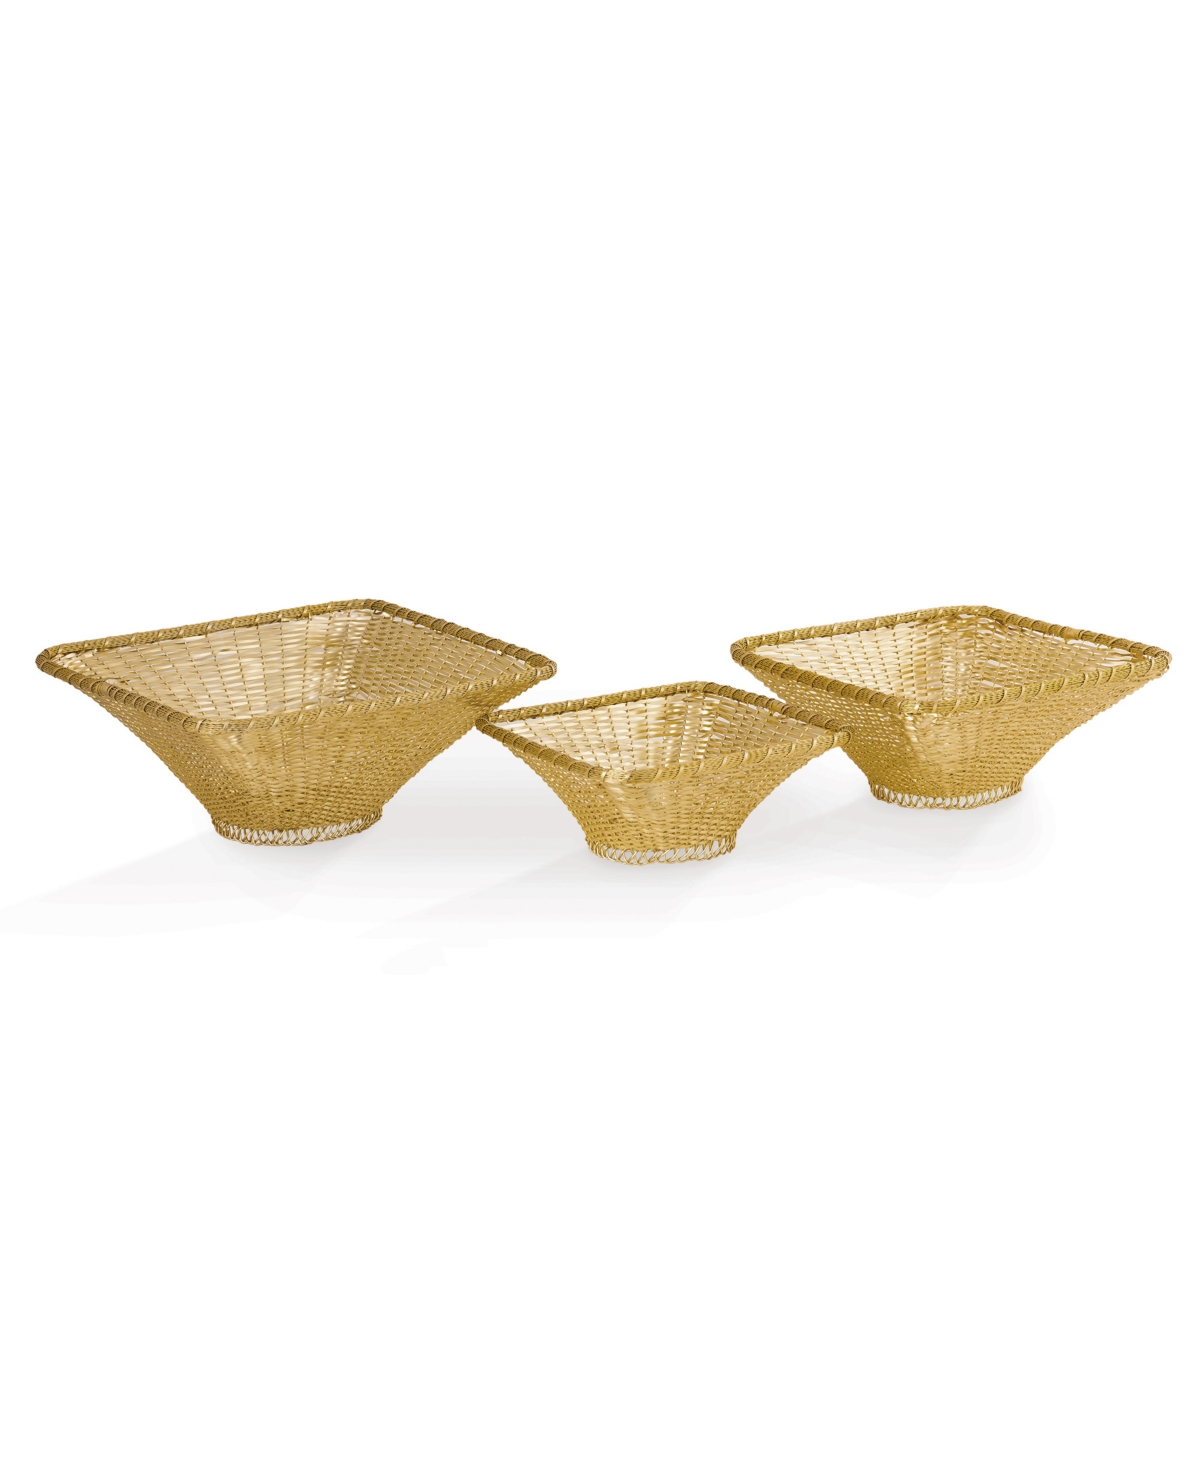 Spi Square Woven Baskets, Set Of 3 In Gold-tone